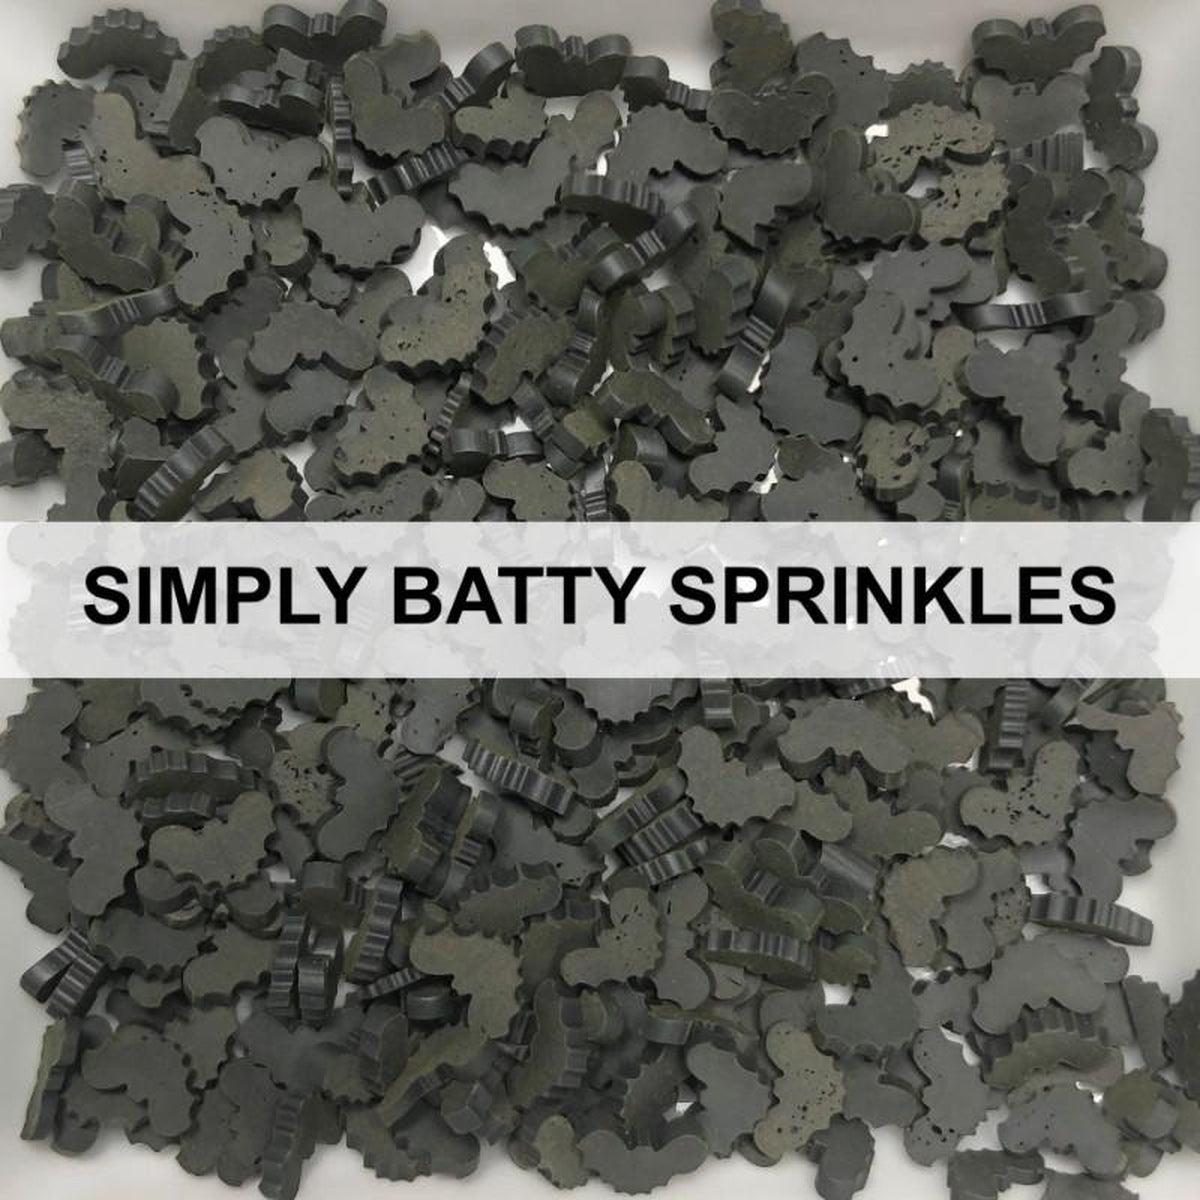 Simply Batty Sprinkles by Kat Scrappiness